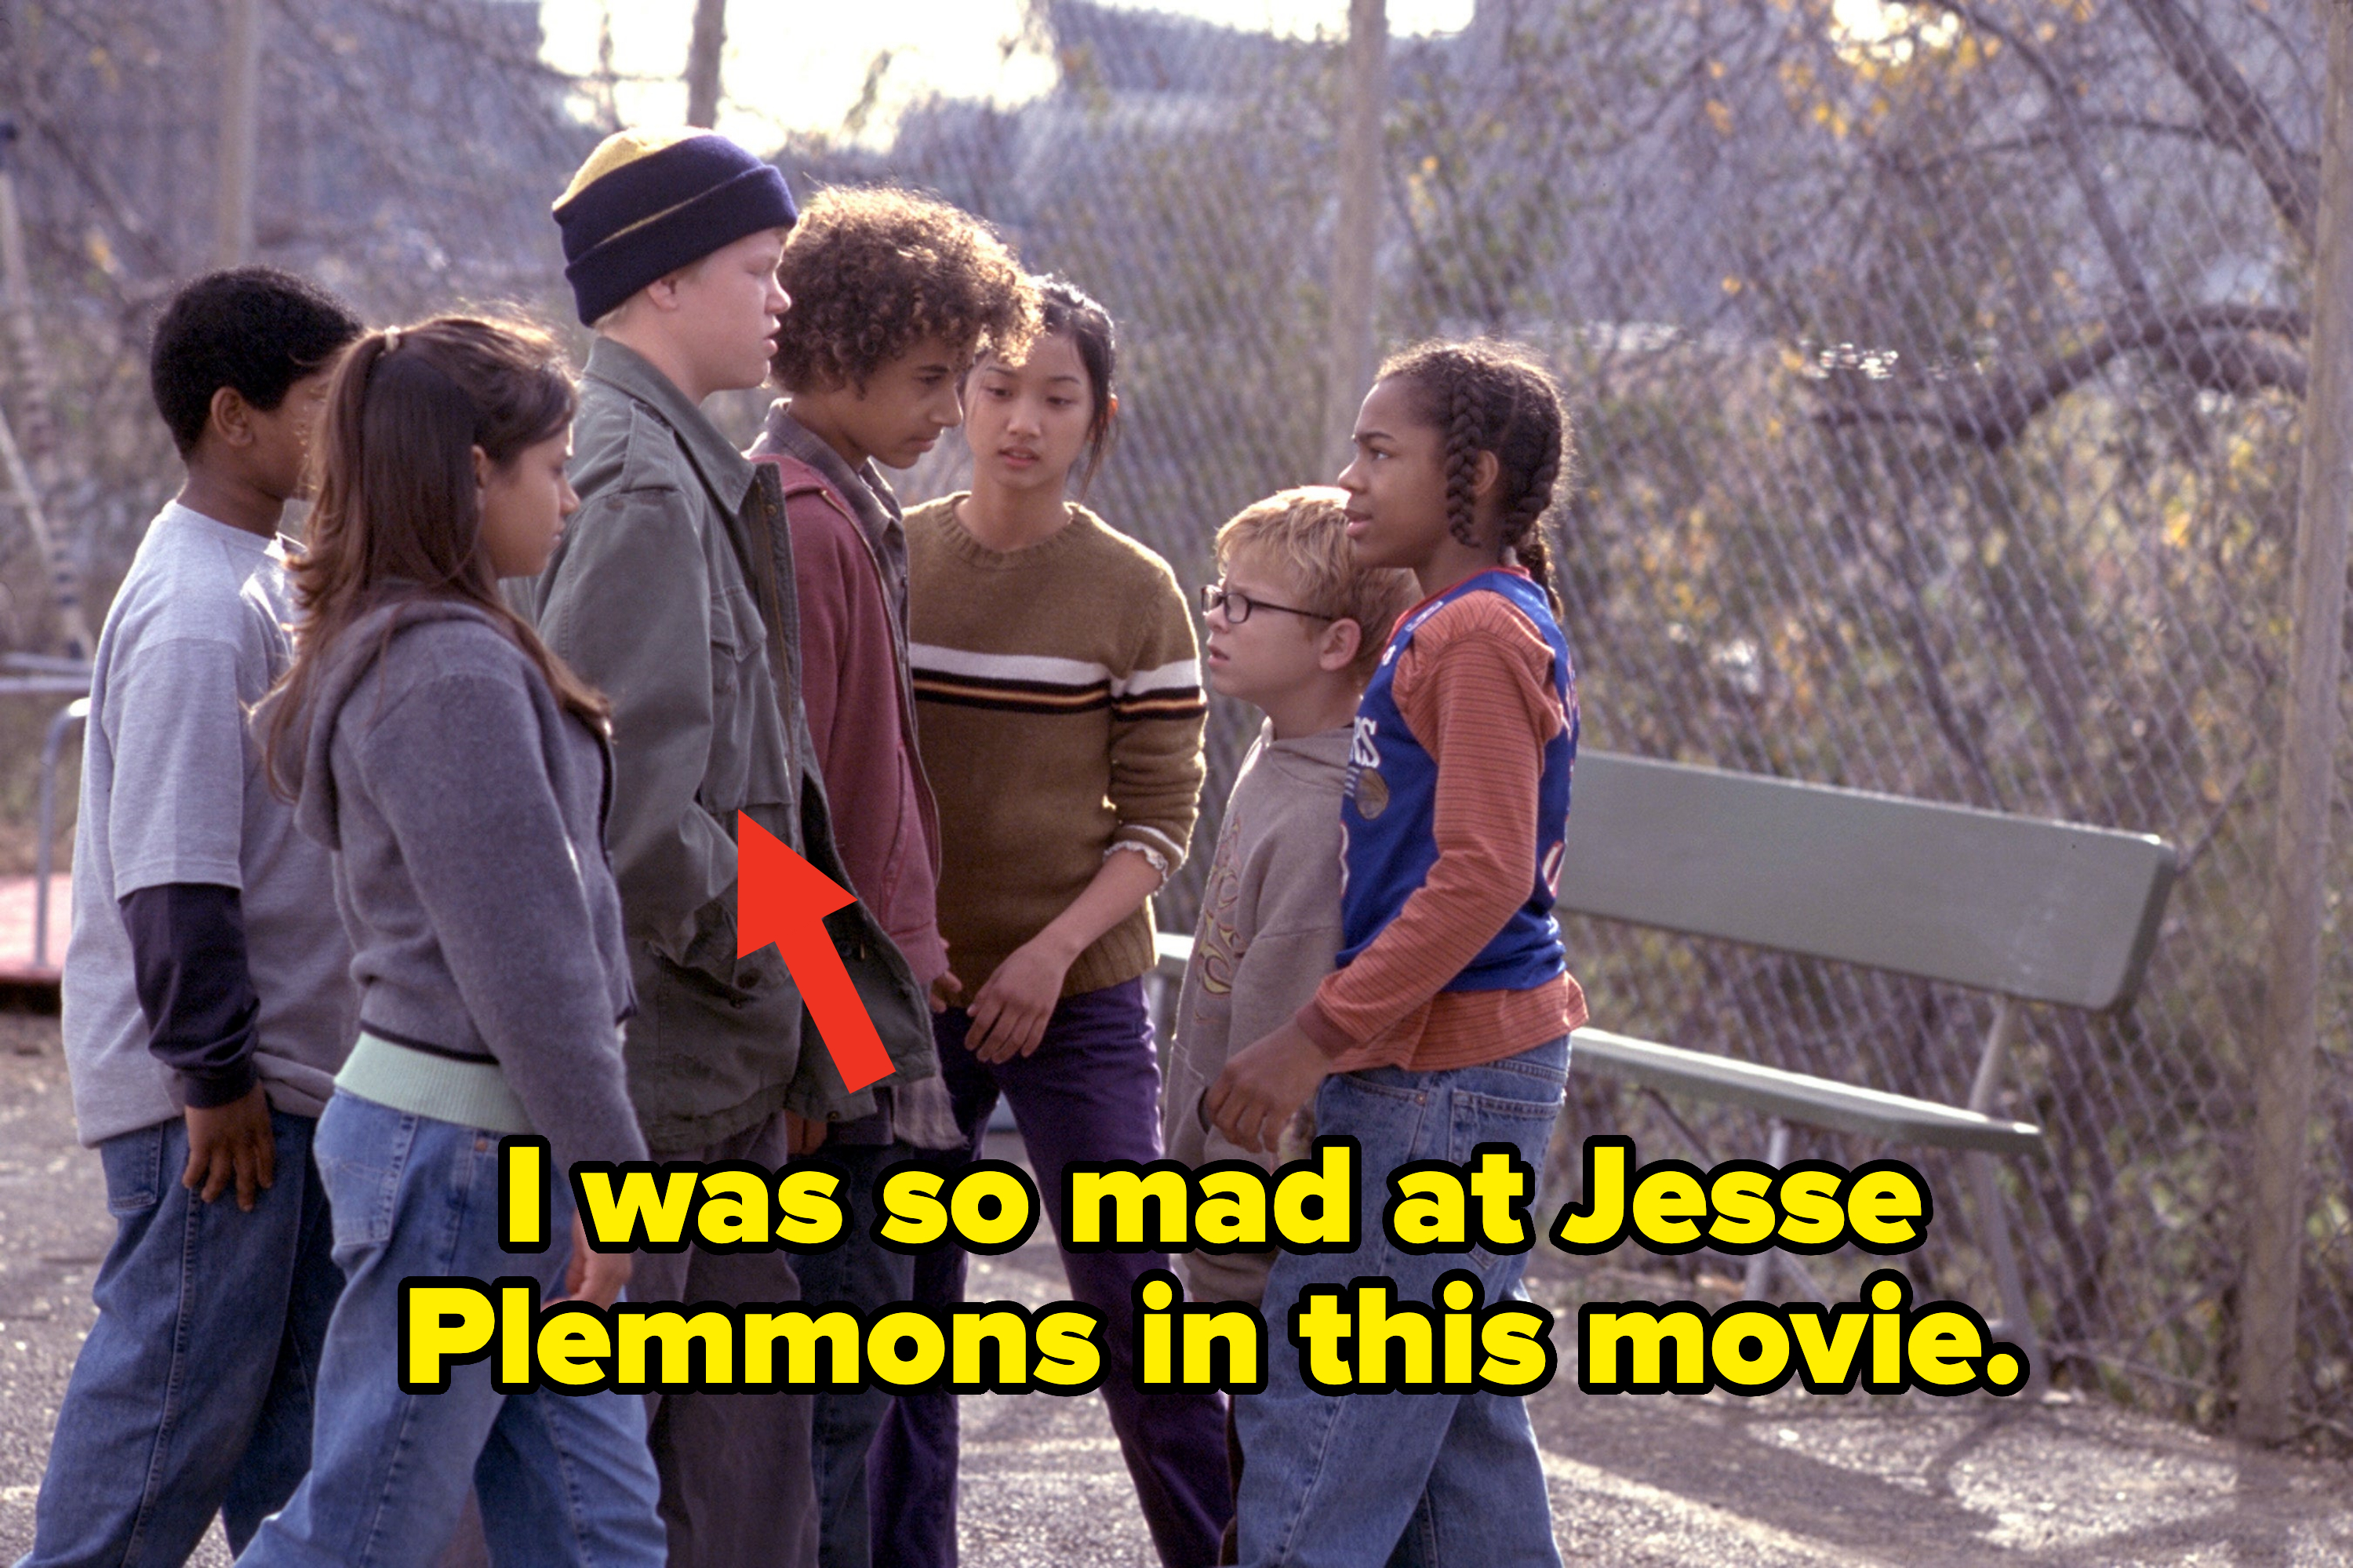 older kids trying to bully murph and Calvin with text, i was so mad at jesse plemmons in this movie